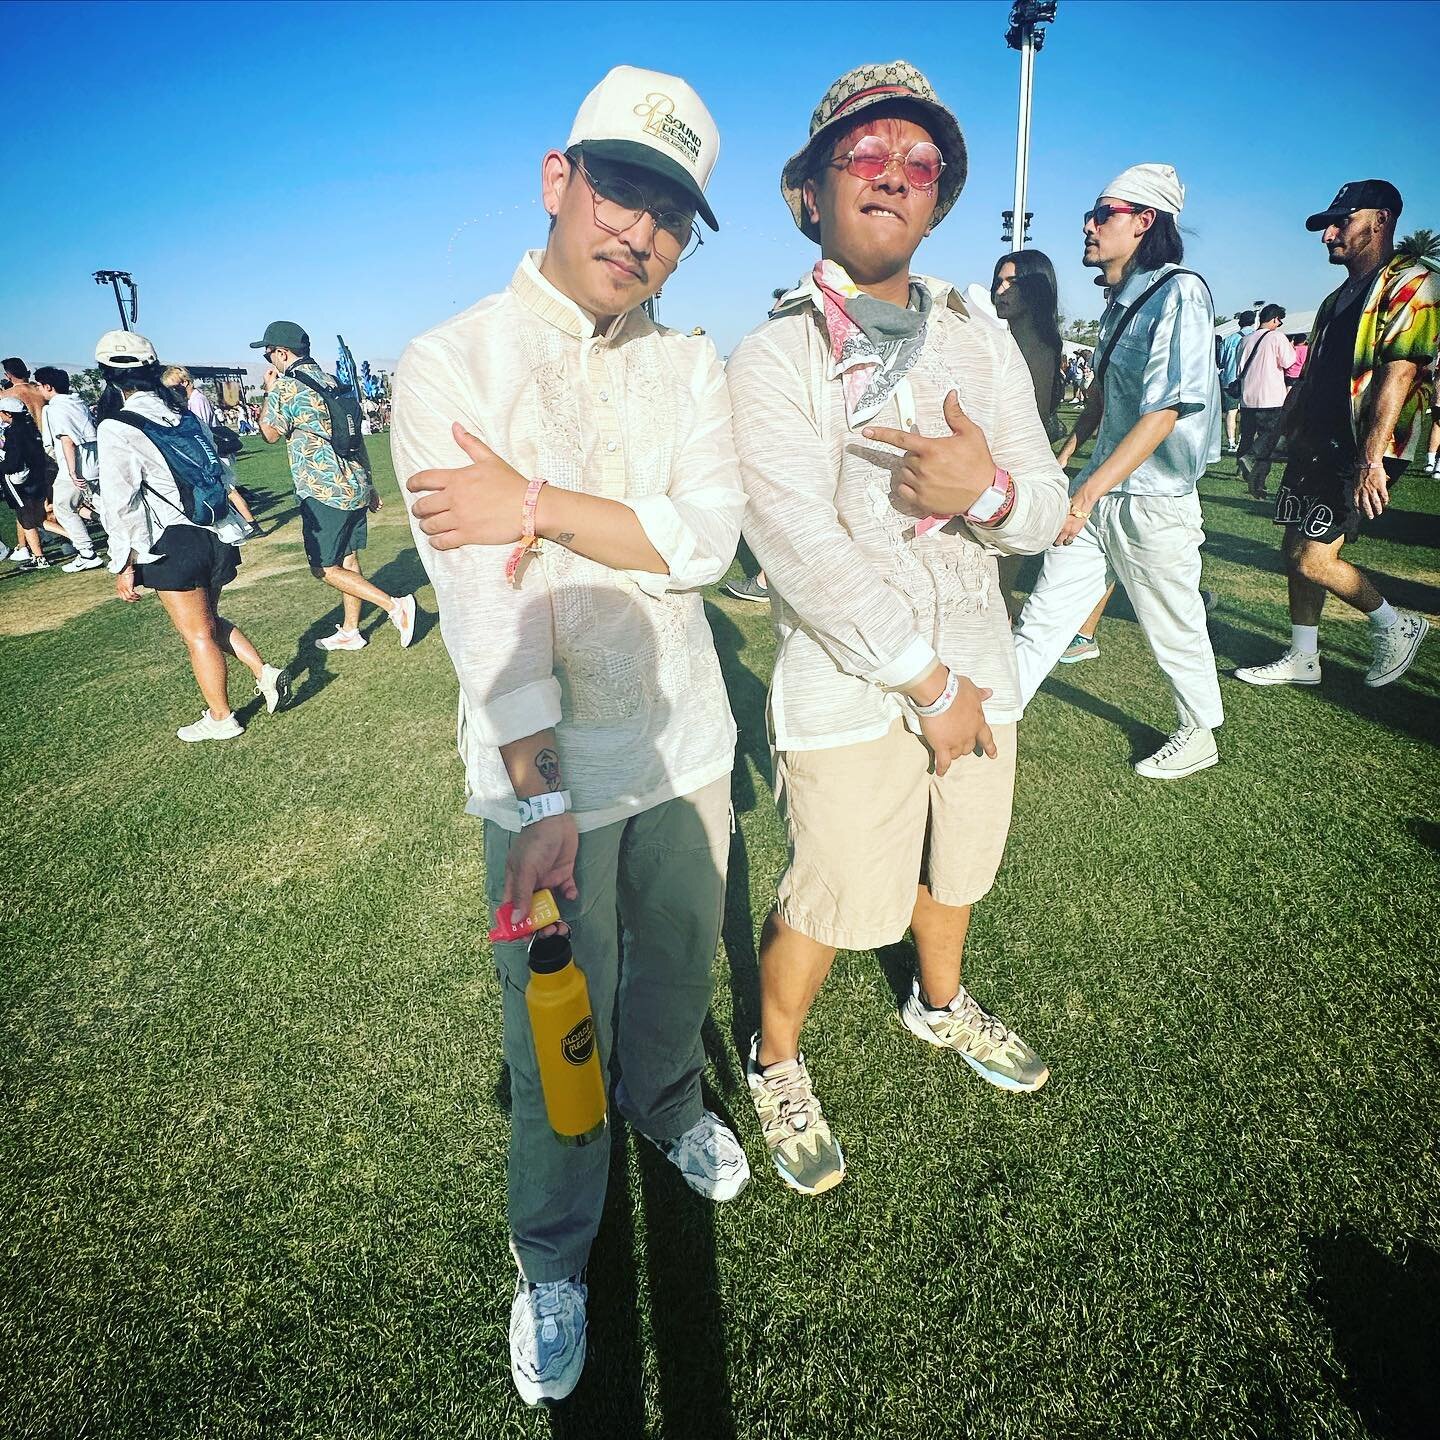 🎡 🌵 🇵🇭 🎈 ☀️ ✨ 

The guest appearances for weekend 2 were aiiiiight but did they have the West Coast x East Coast Filipino comedian duo making barongs Coachella fashion collecting mano pos from the Kenny Beats moshpit FOR THE CULTURE

🫳😎

Didn&